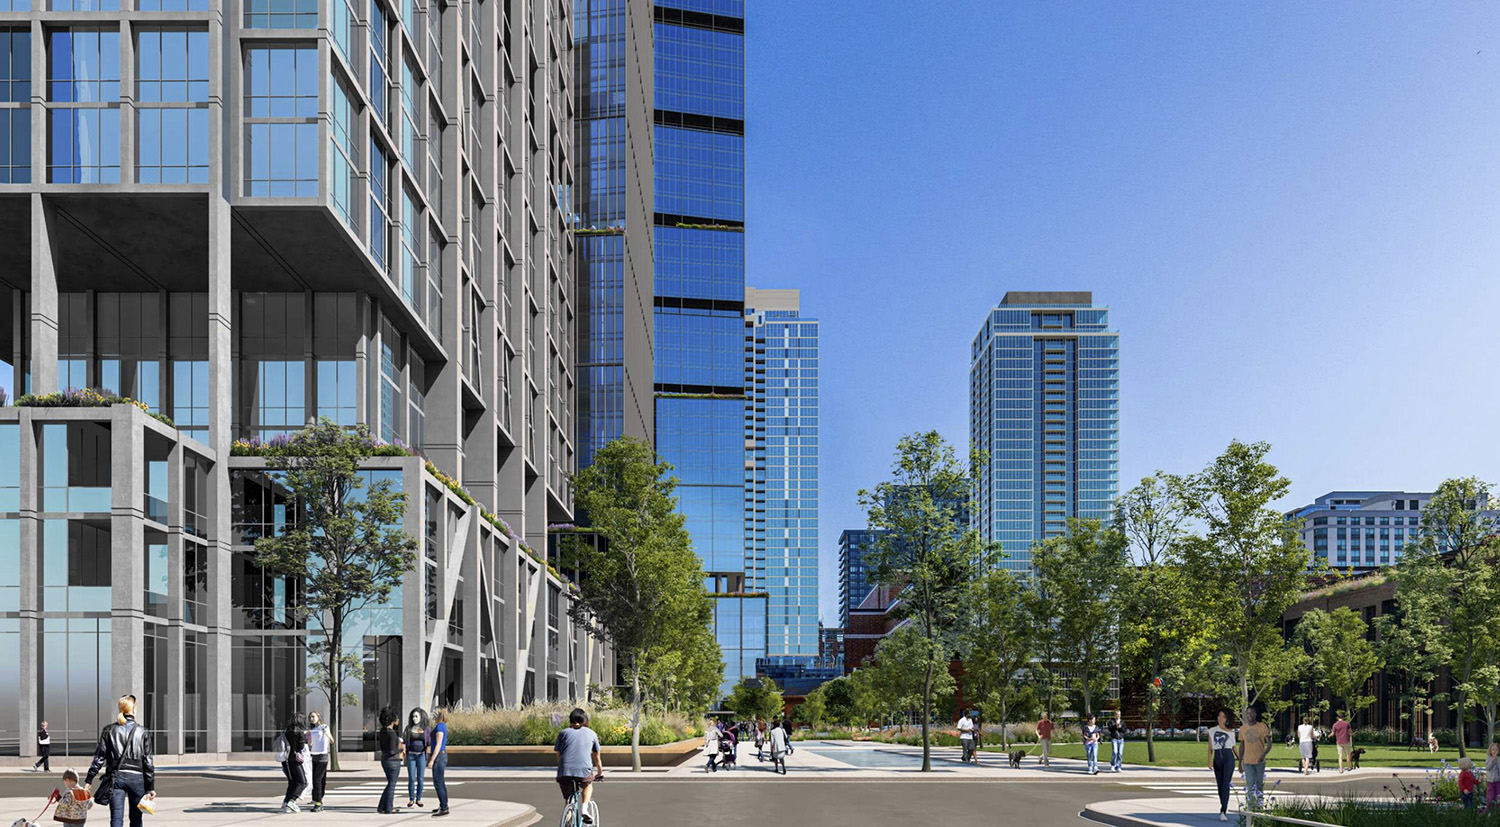 View of Phase 3 Park and Adjacent 312 W walton Street in North Union. Rendering by Hartshorne Plunkard Architecture